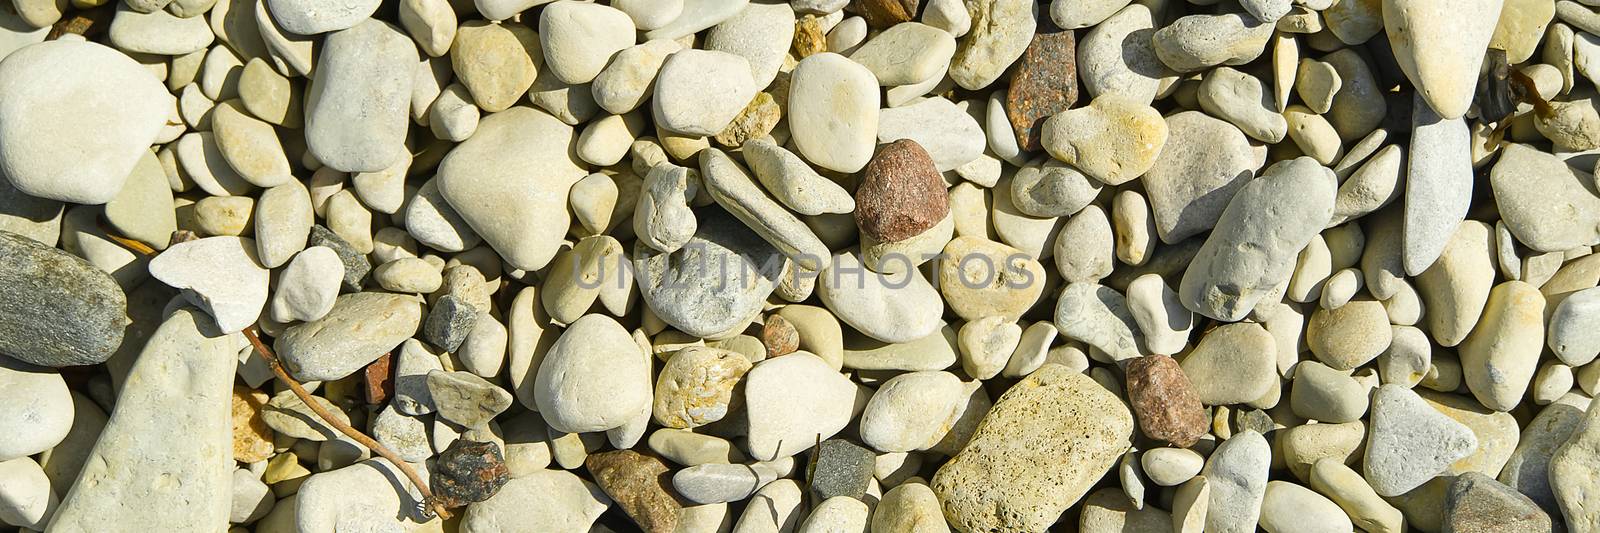 Baltick Sea beach. Natural small pebbles on the rocky seashore, panorama. can be usedas texture or backround. by PhotoTime